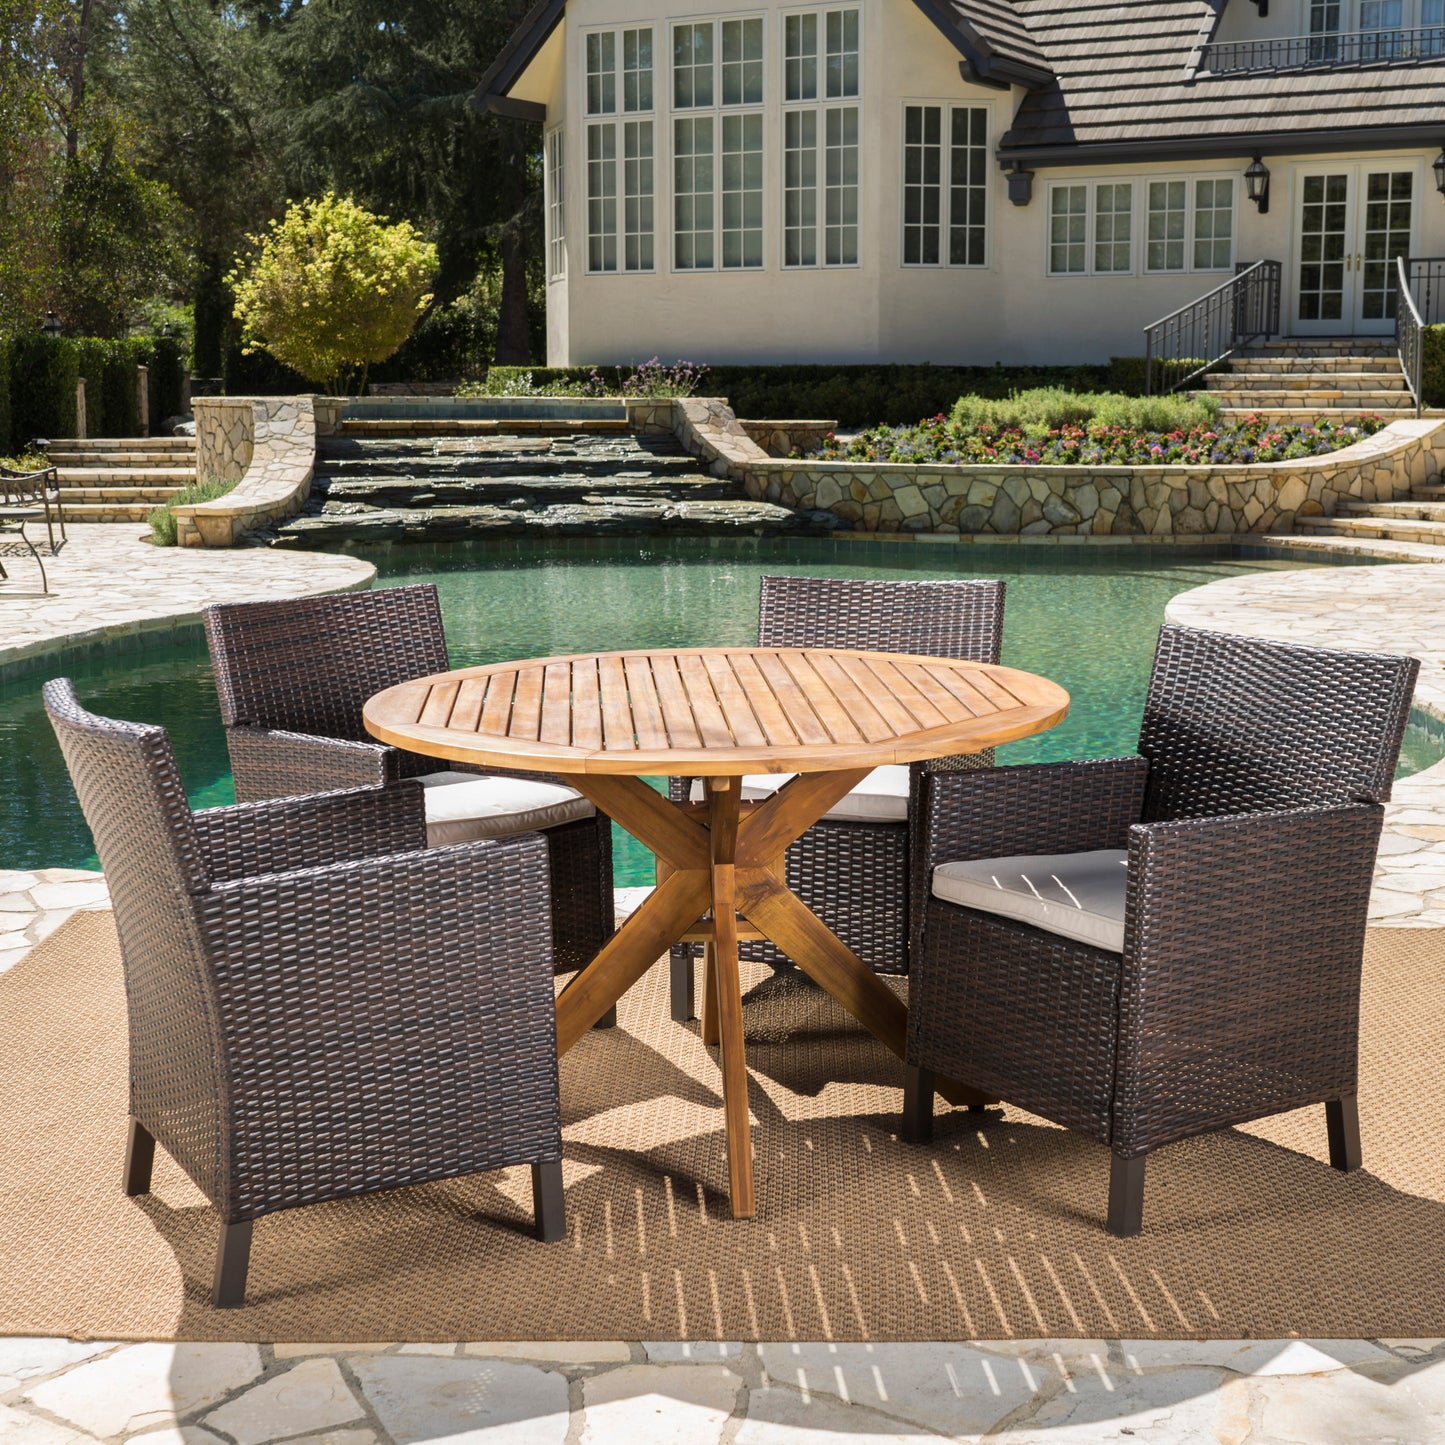 Orwel Outdoor 5 Piece Multi-brown Wicker Dining Set with Teak Finish Table